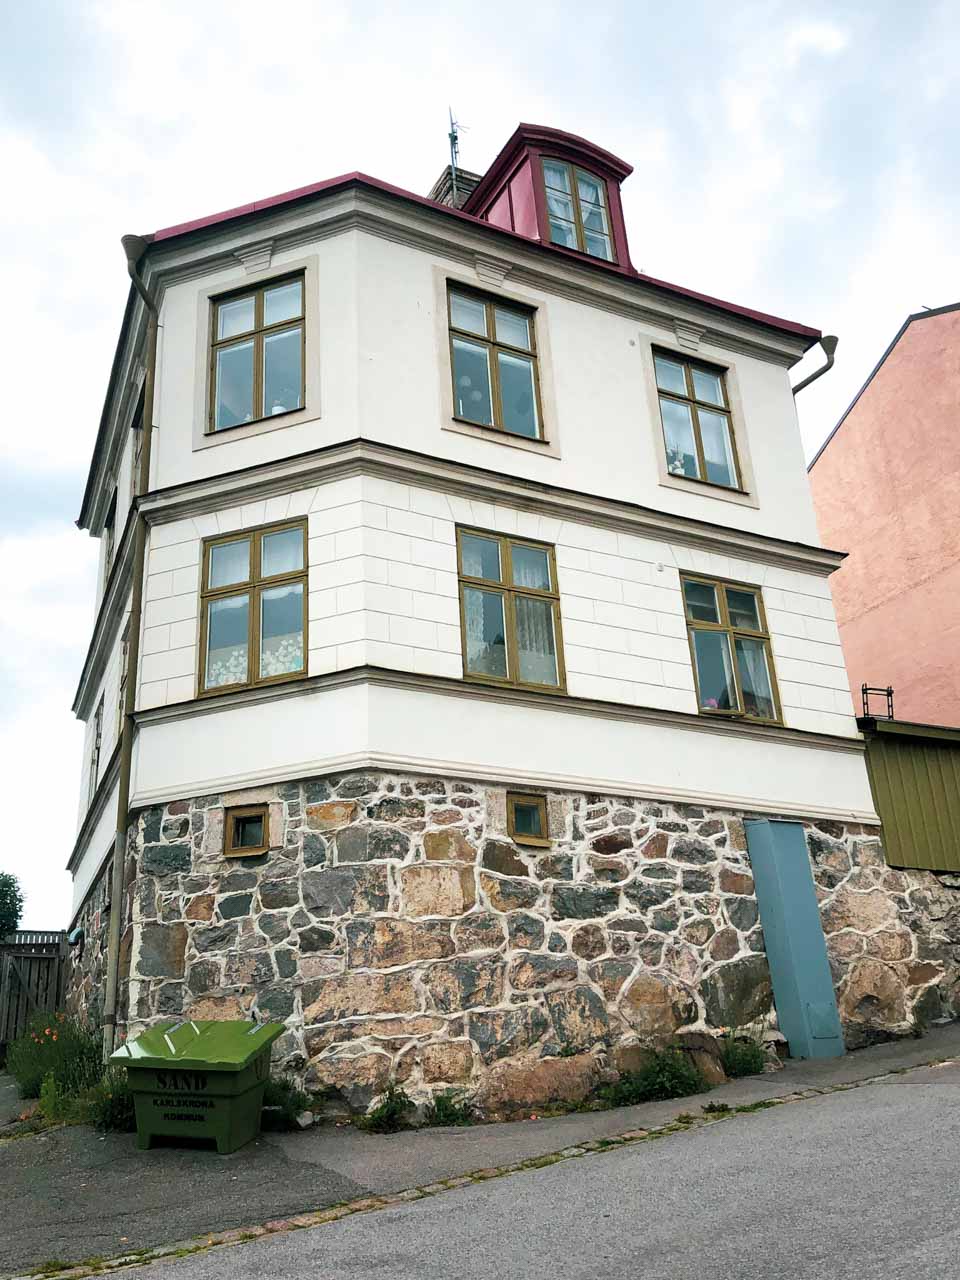 A white house with a stone foundation in Karlskrona, Sweden